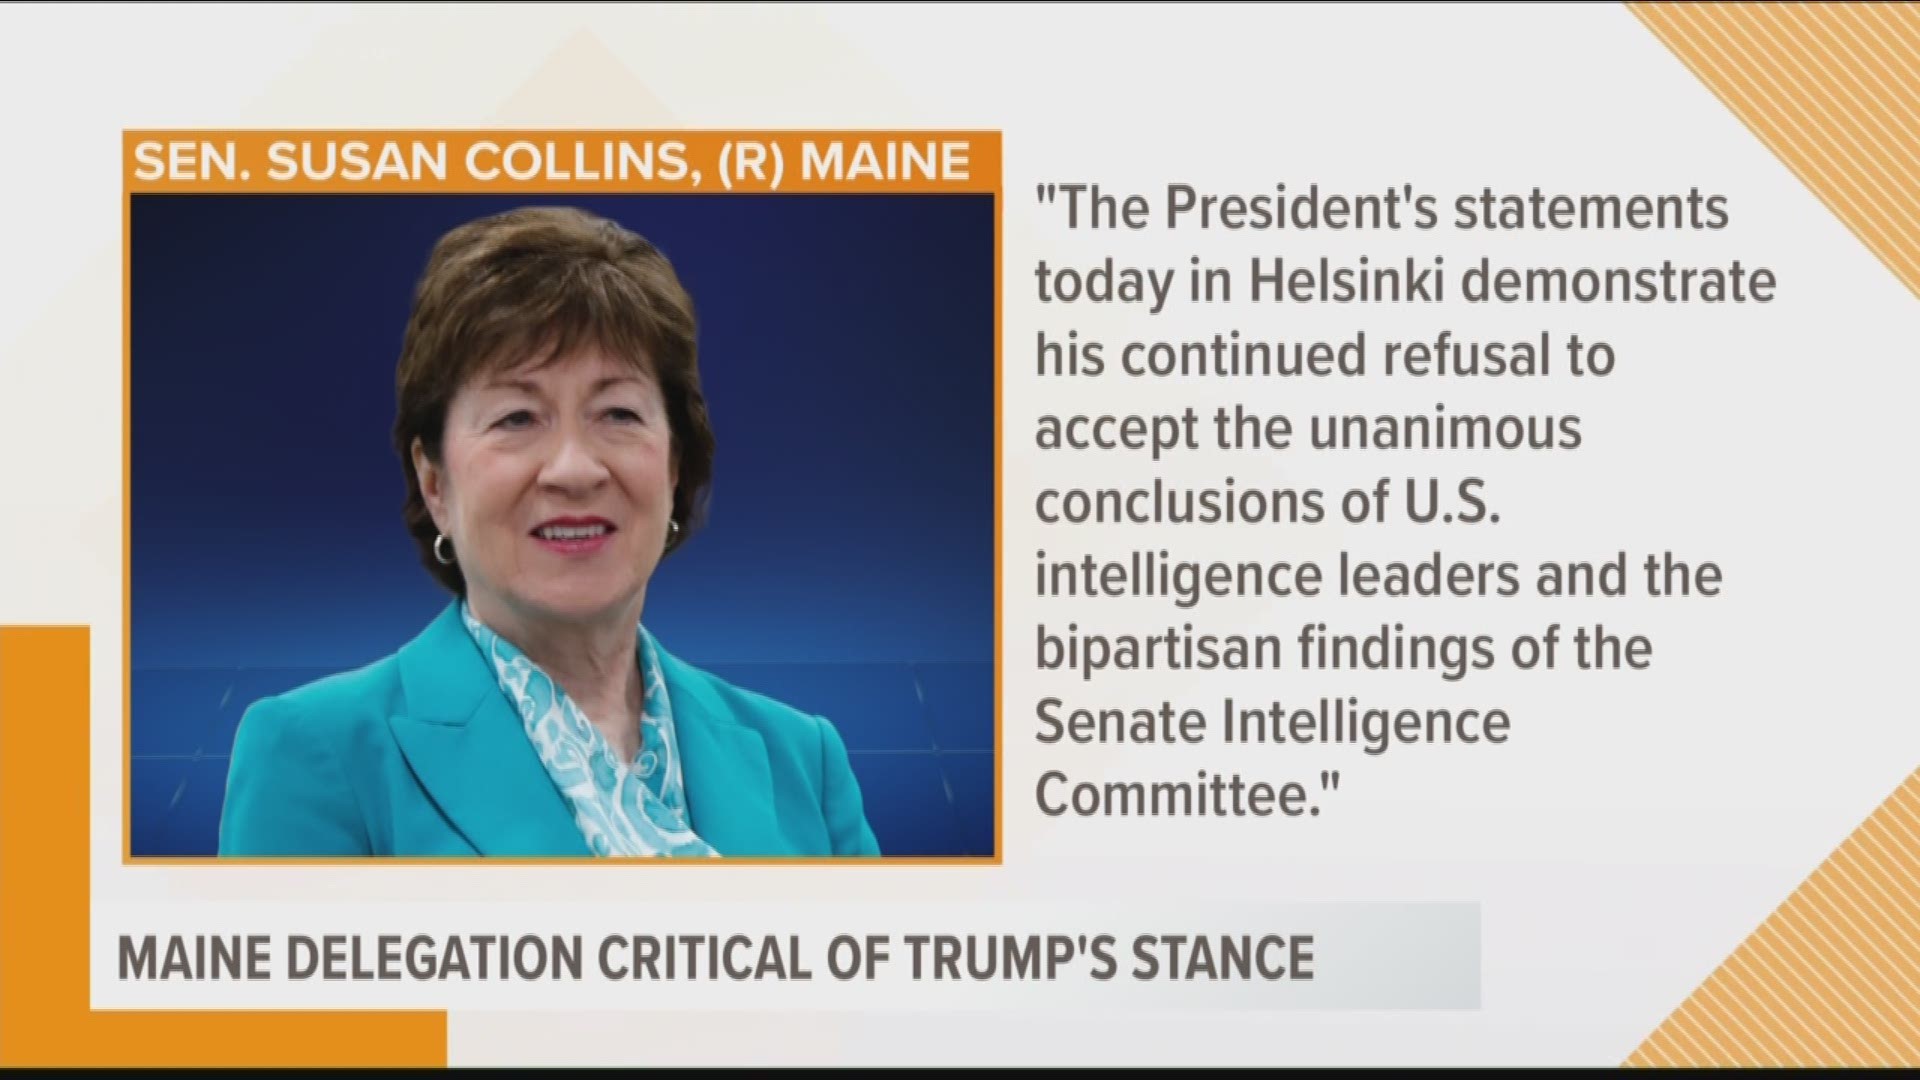 Maine delegation critical of Trump's stance